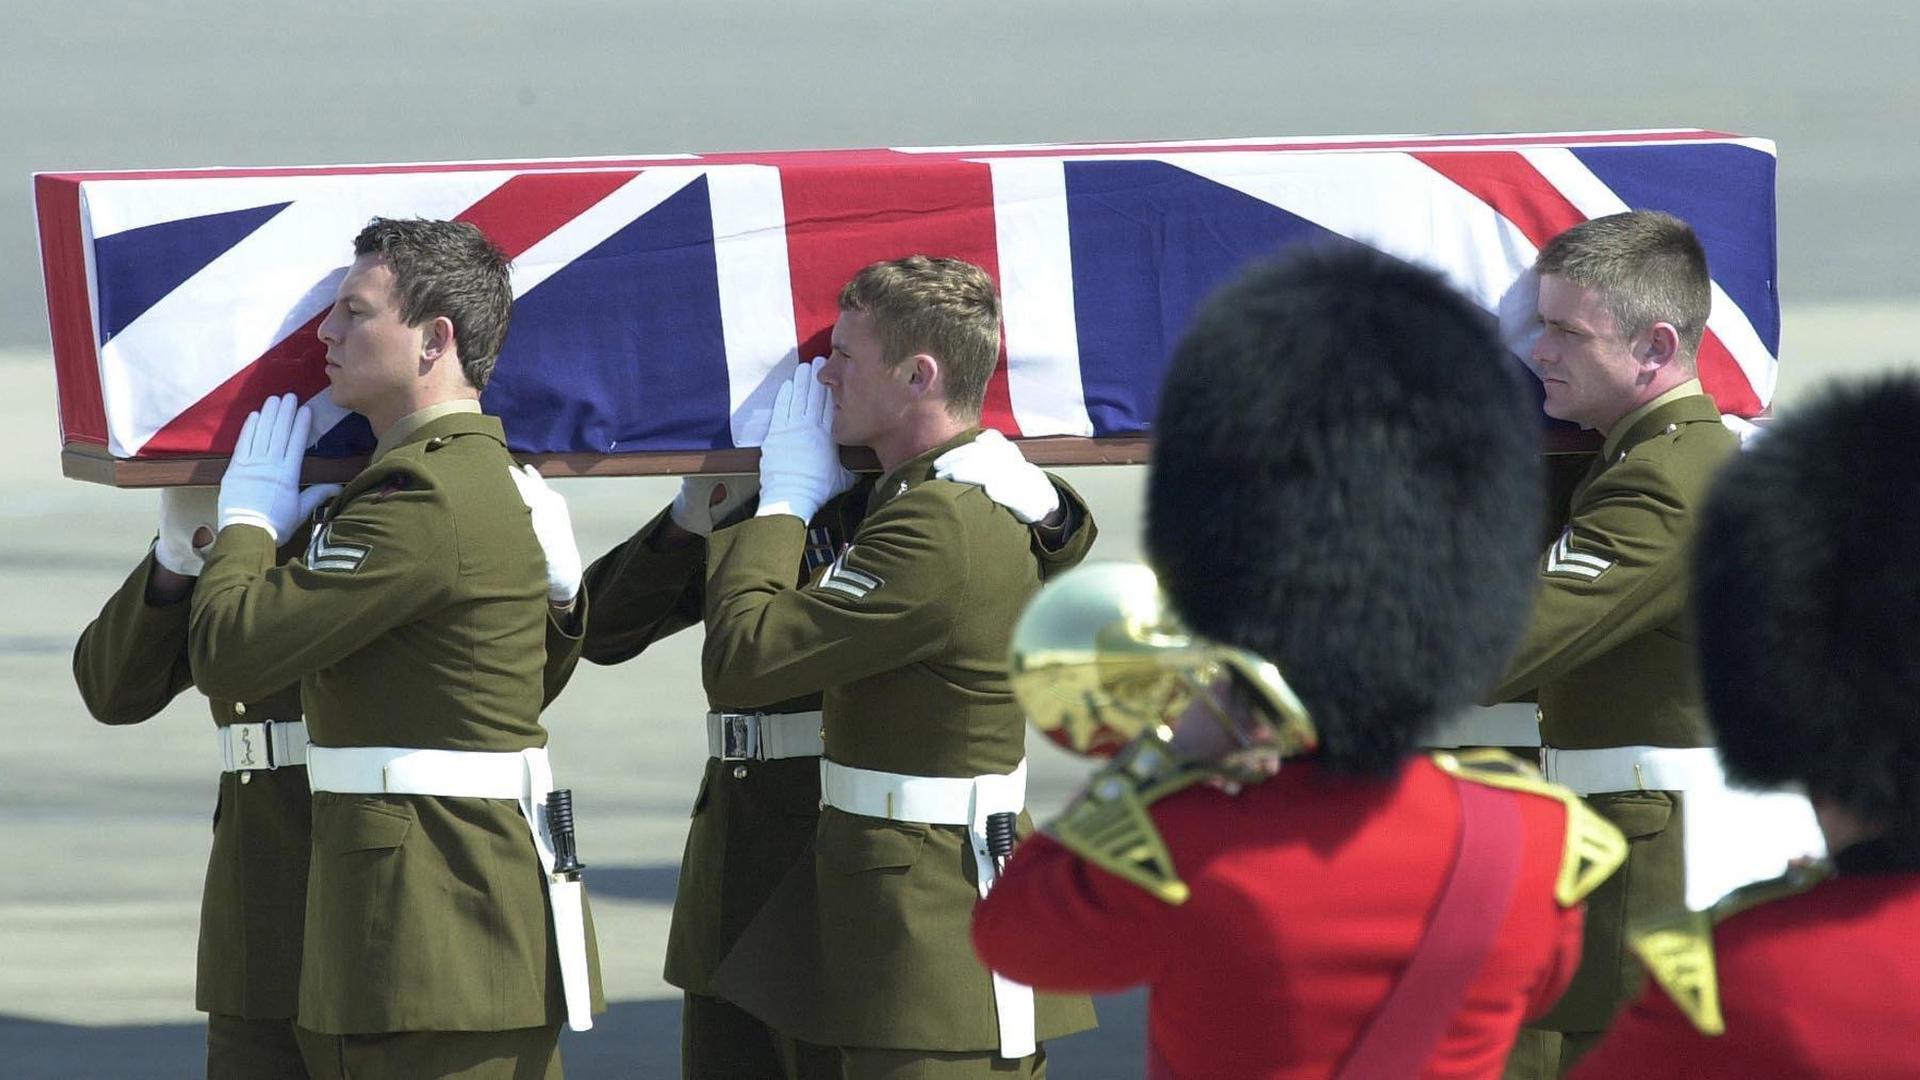 The coffin of Lance Corporal Shaun Brierley, of Britain's 212 Signal Squadron, who was killed on duty in the Gulf on March 30, is carried from a Boeing C-17 aircraft at RAF Brize Norton in Oxforshire, Britain, April 8, 2003.